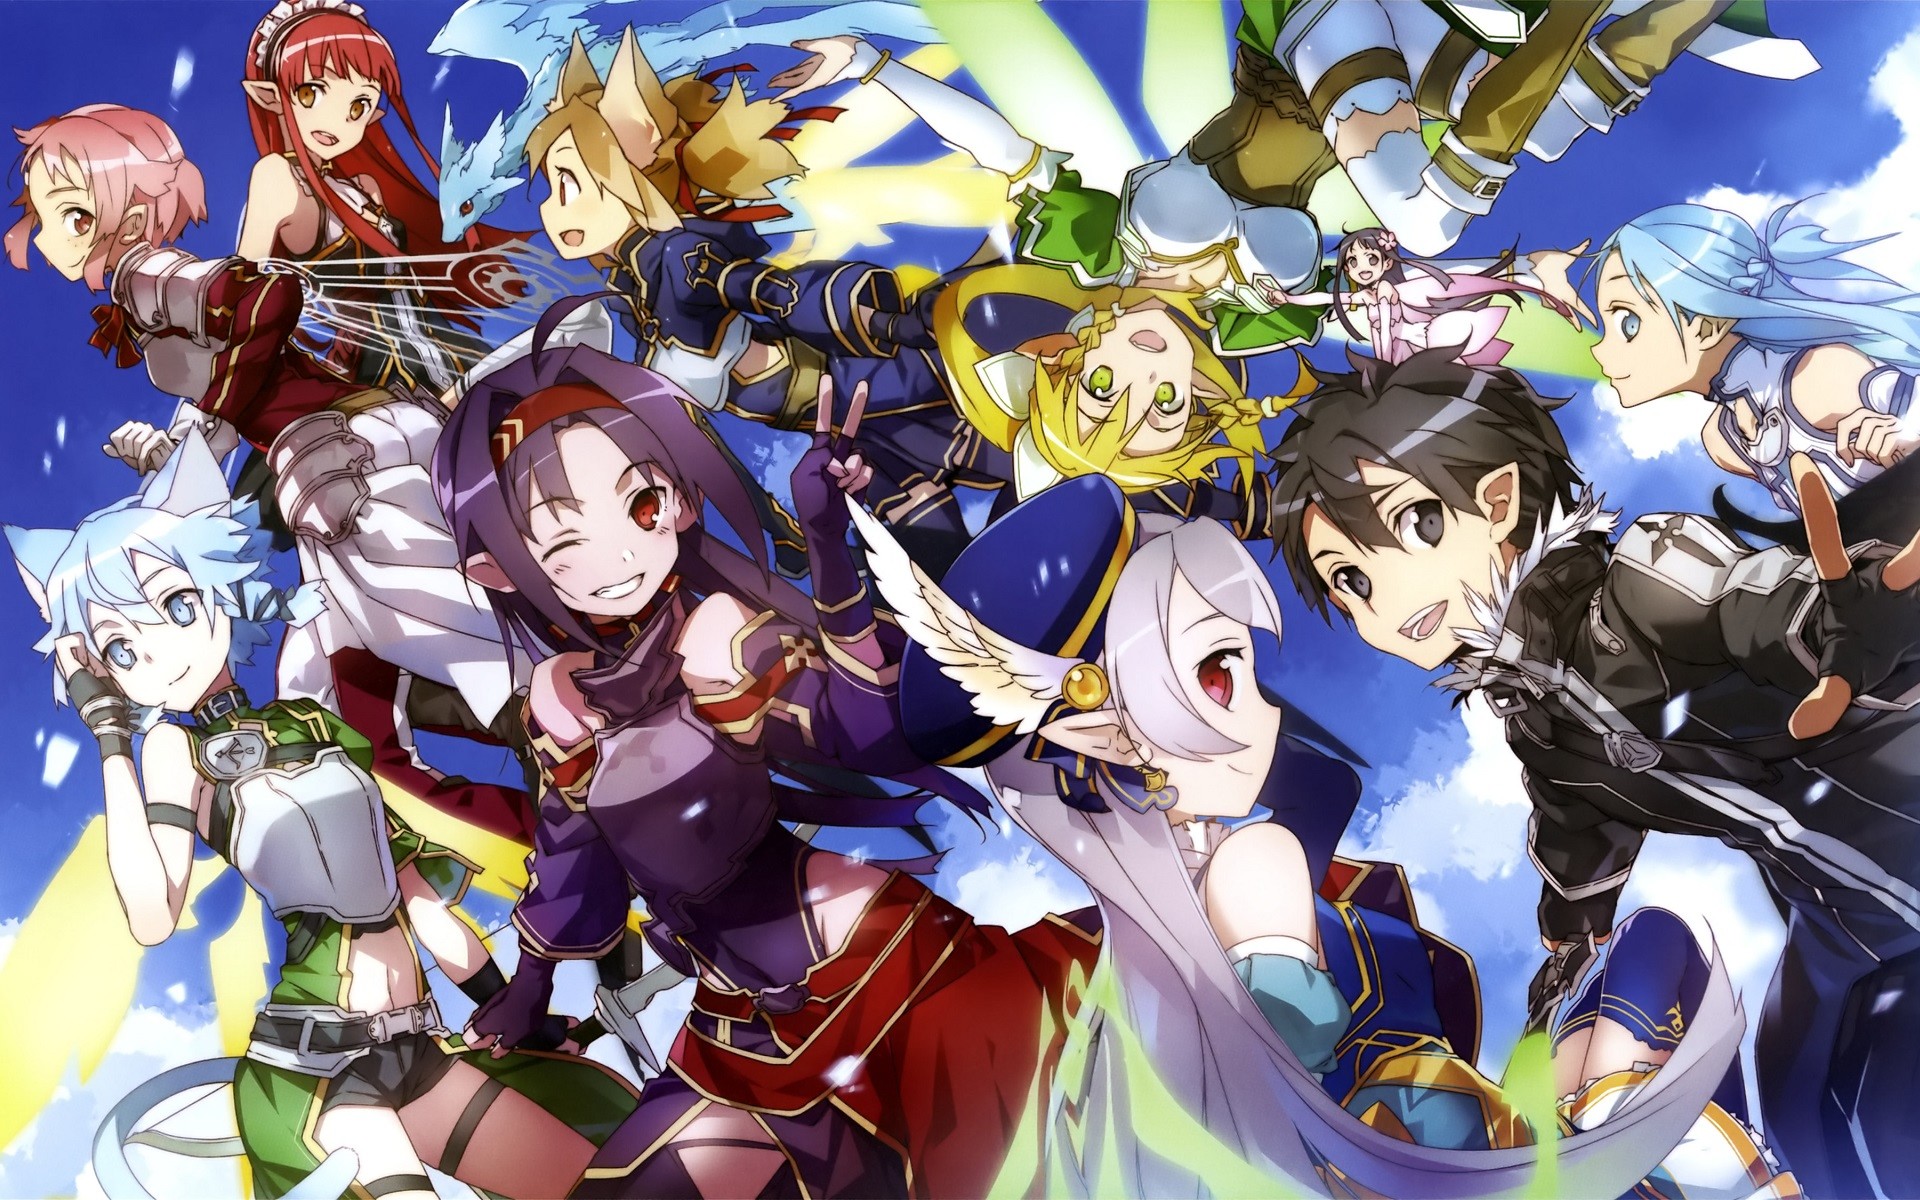 1920x1200 image lost song wallpaper i shooped for you guys without watermarks Â·  SaveEnlarge Â· sword art online ...